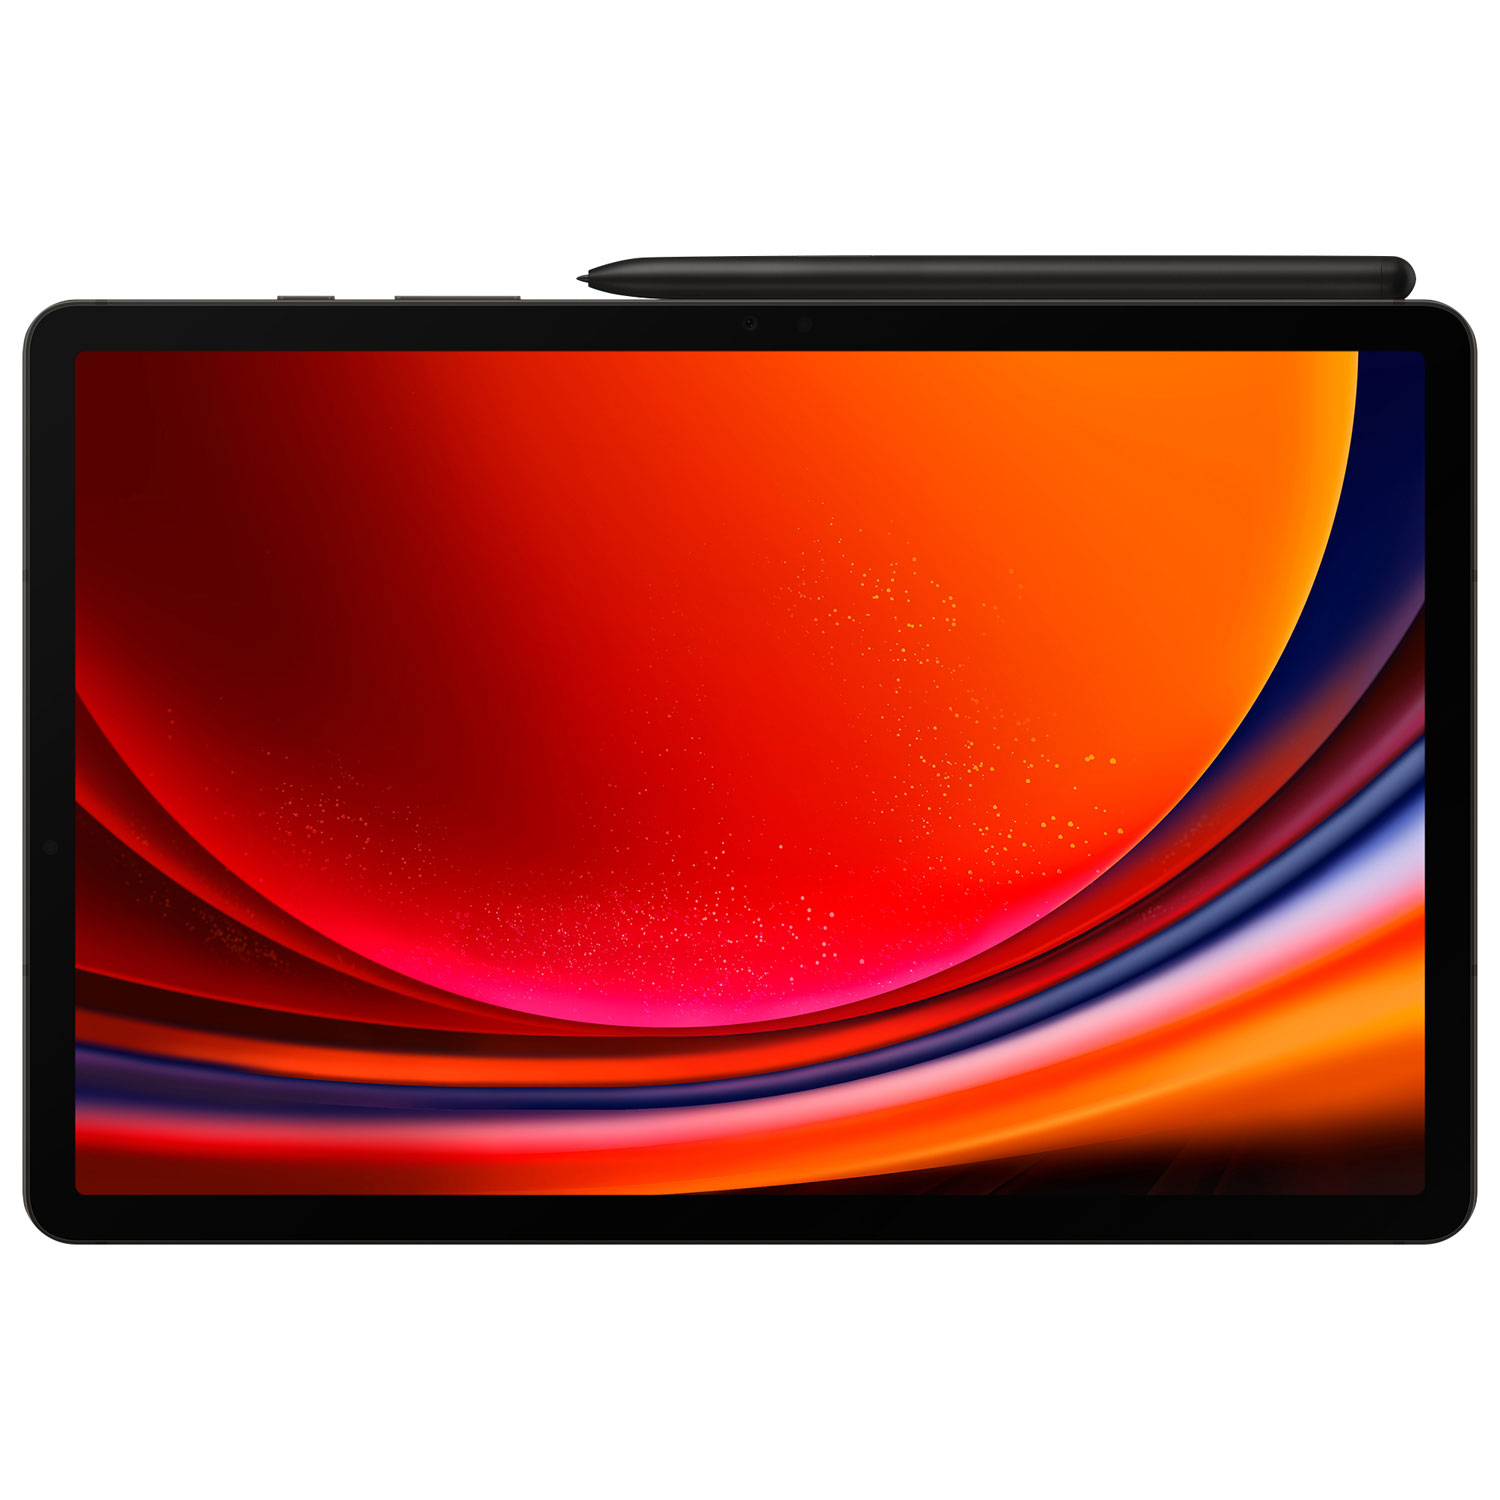 Samsung Galaxy Tab S9 11" 256GB Android Tablet with Snapdragon Gen 2 Processor - Graphite - Exclusive Retail Partner